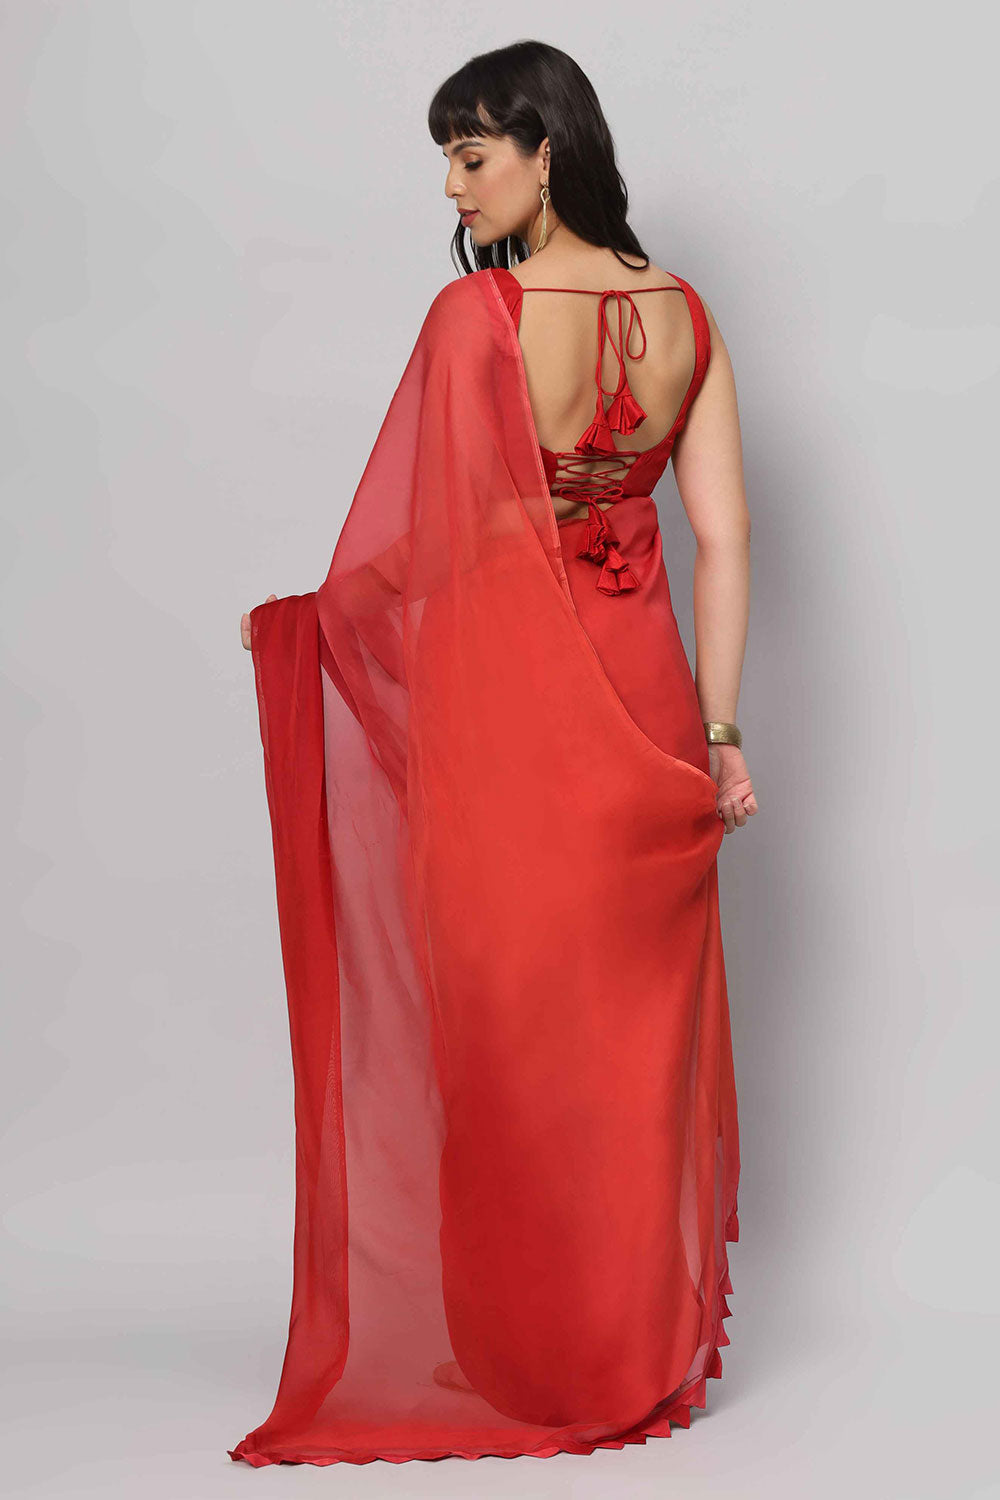 Shop Rina Multi-Shaded Rouge Soft Organza One Minute Saree at best offer at our  Store - One Minute Saree